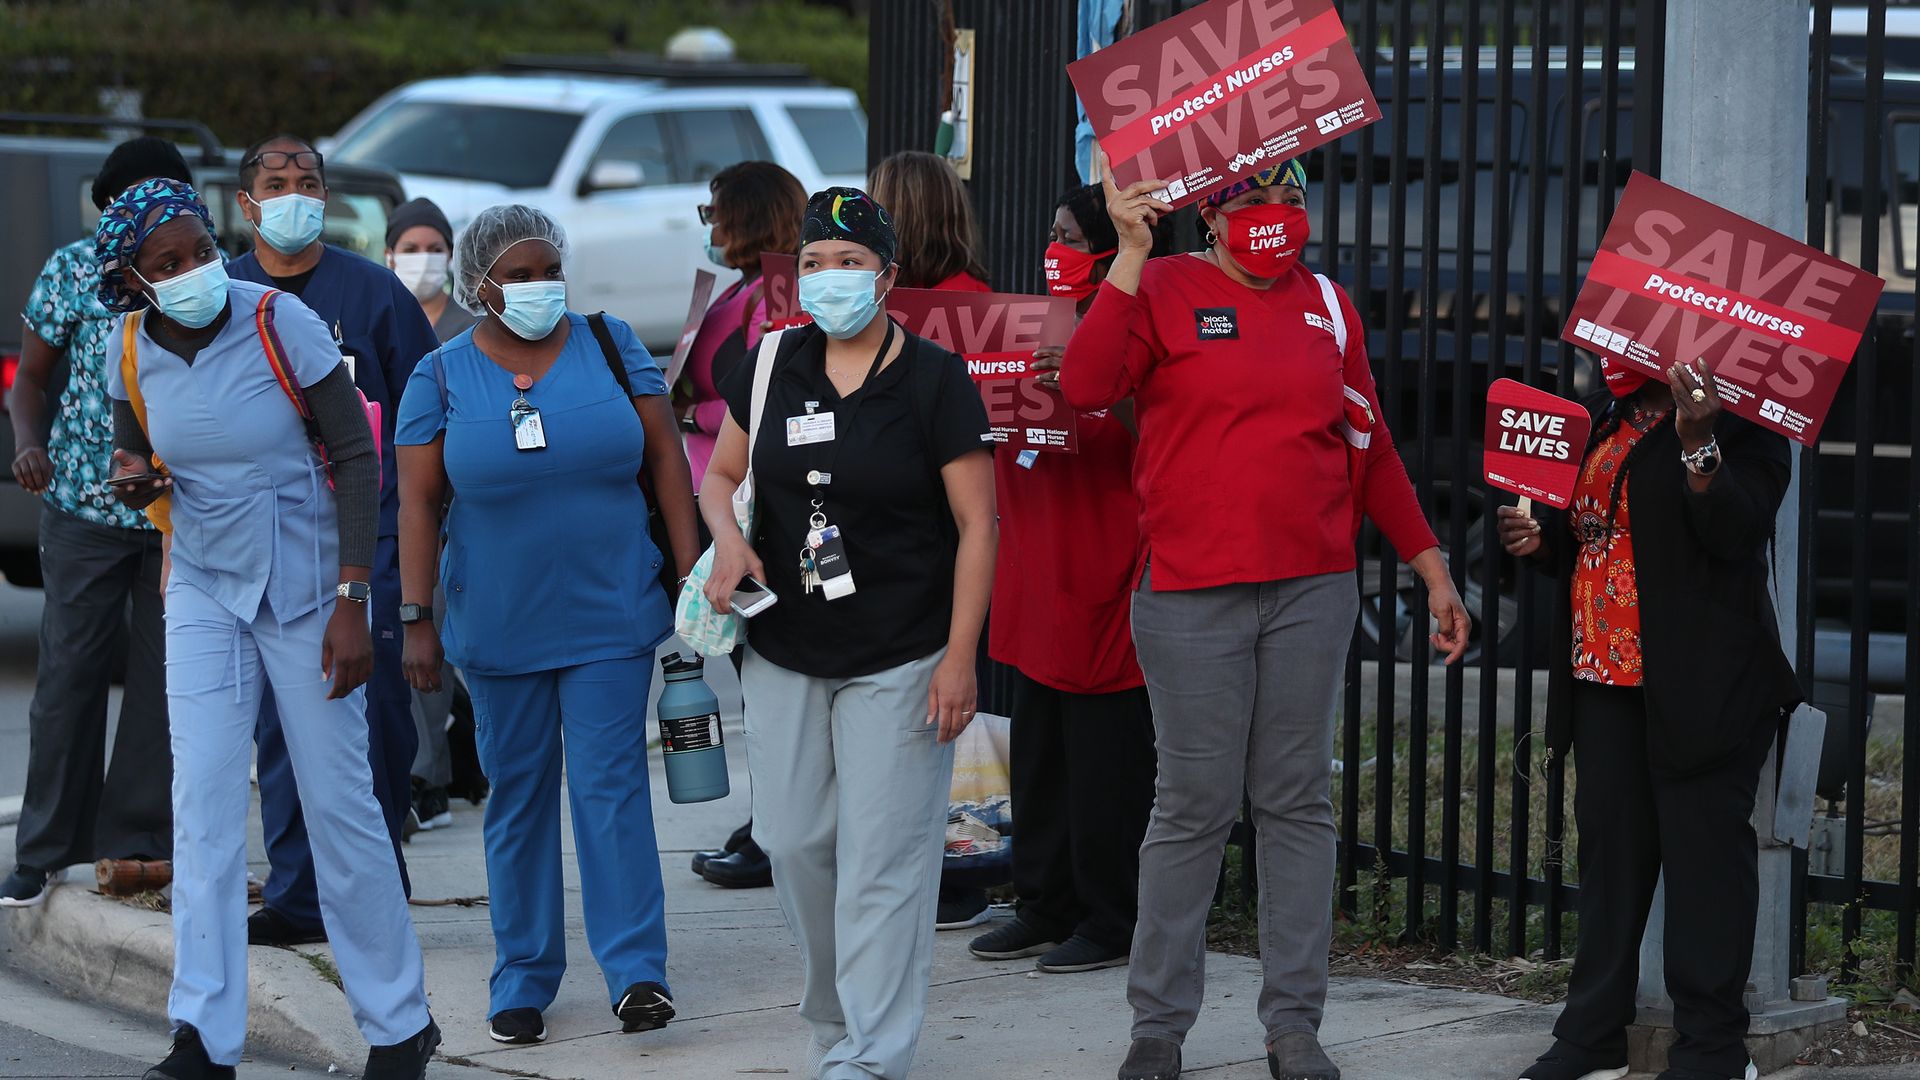 Healthcare workers on their way to work walk past demonstrators who are taking part in a national day of action to save lives during COVID-19 on August 05, 2020 in Miami, Florida. 